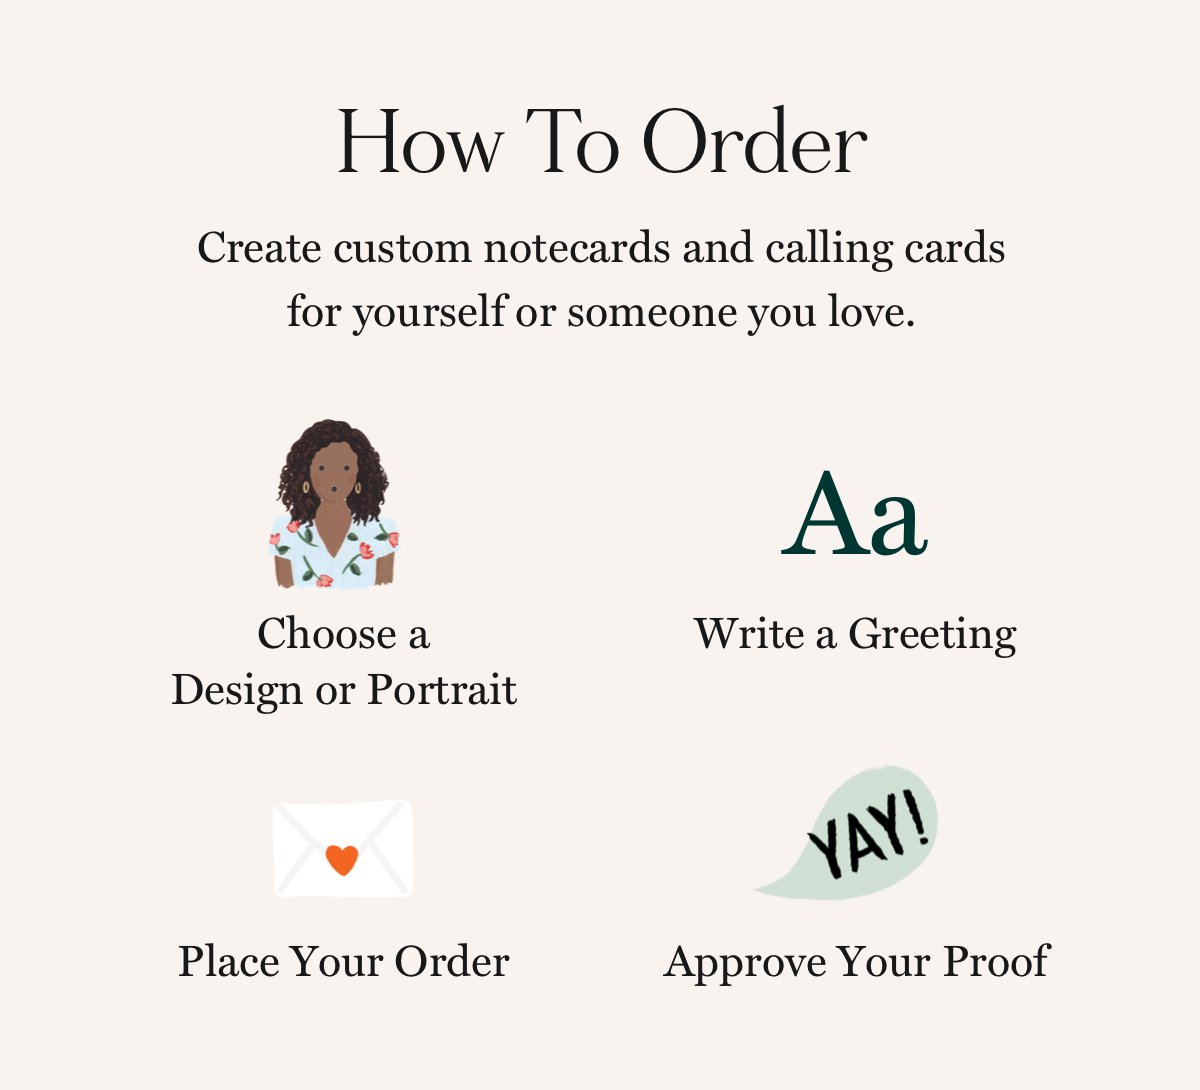 How to order. Create a custom boxed set of notecards for yourself or someone you love.